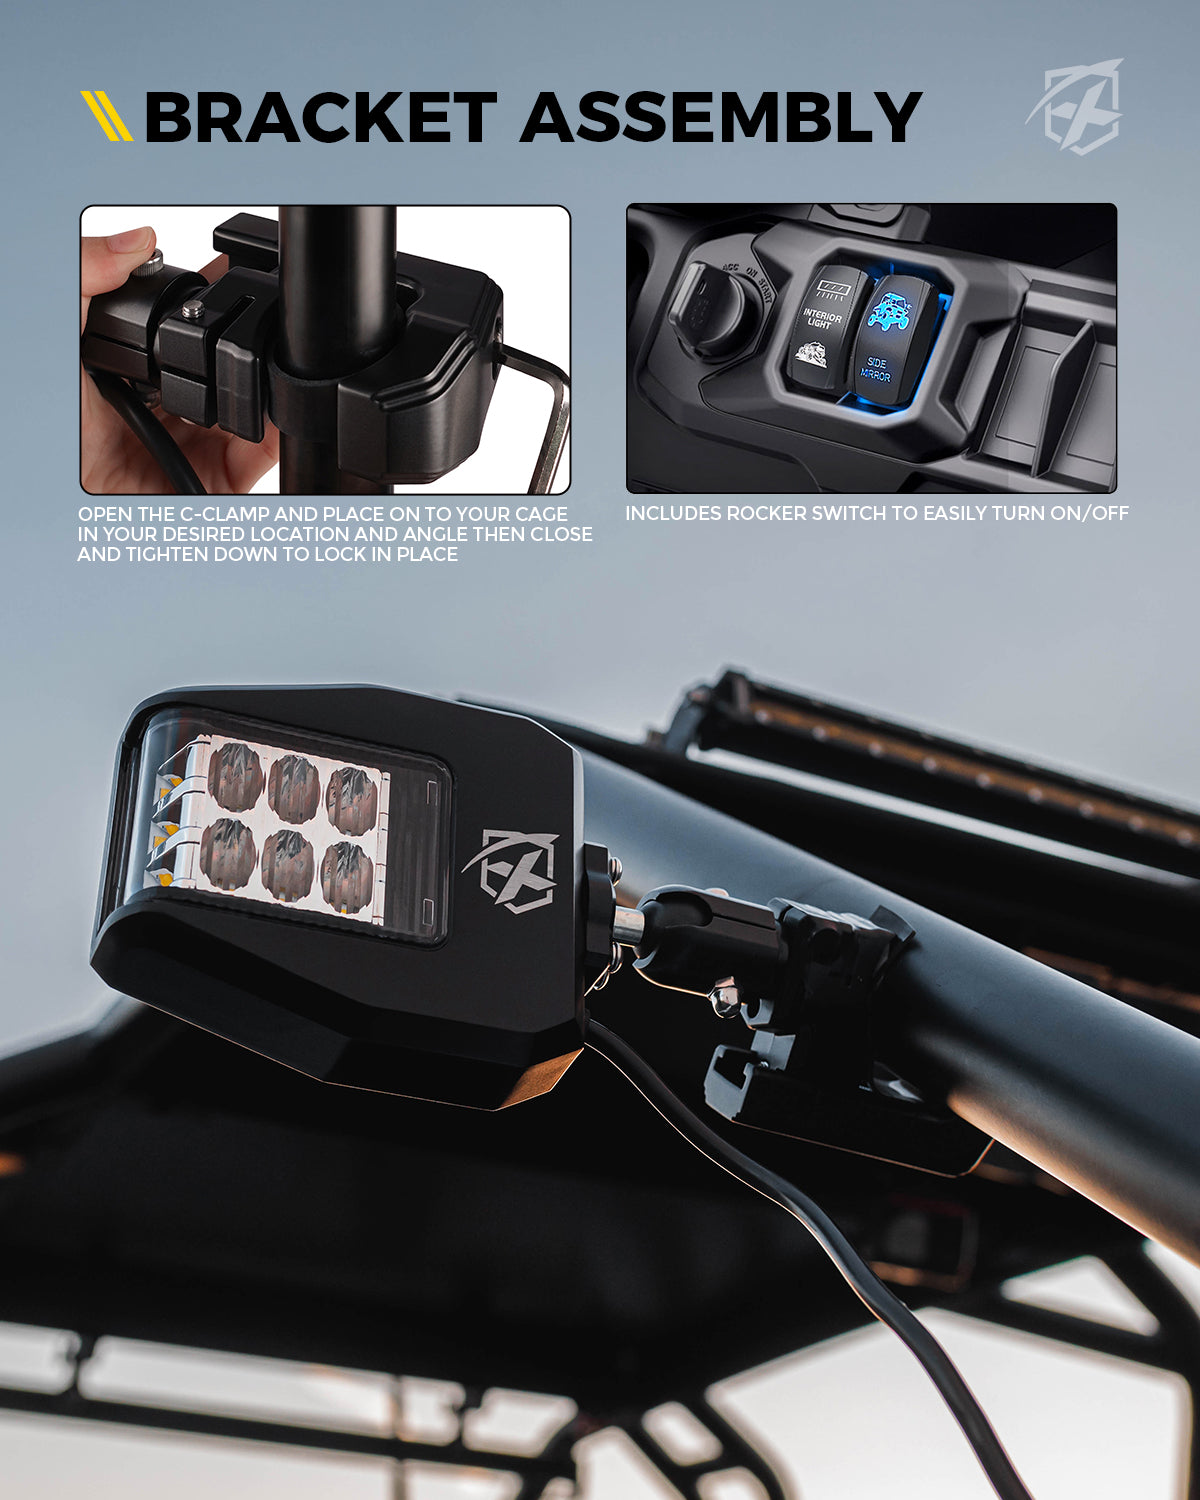 UTV Side View Mirrors with LED Spotlights & C-Clamp Brackets